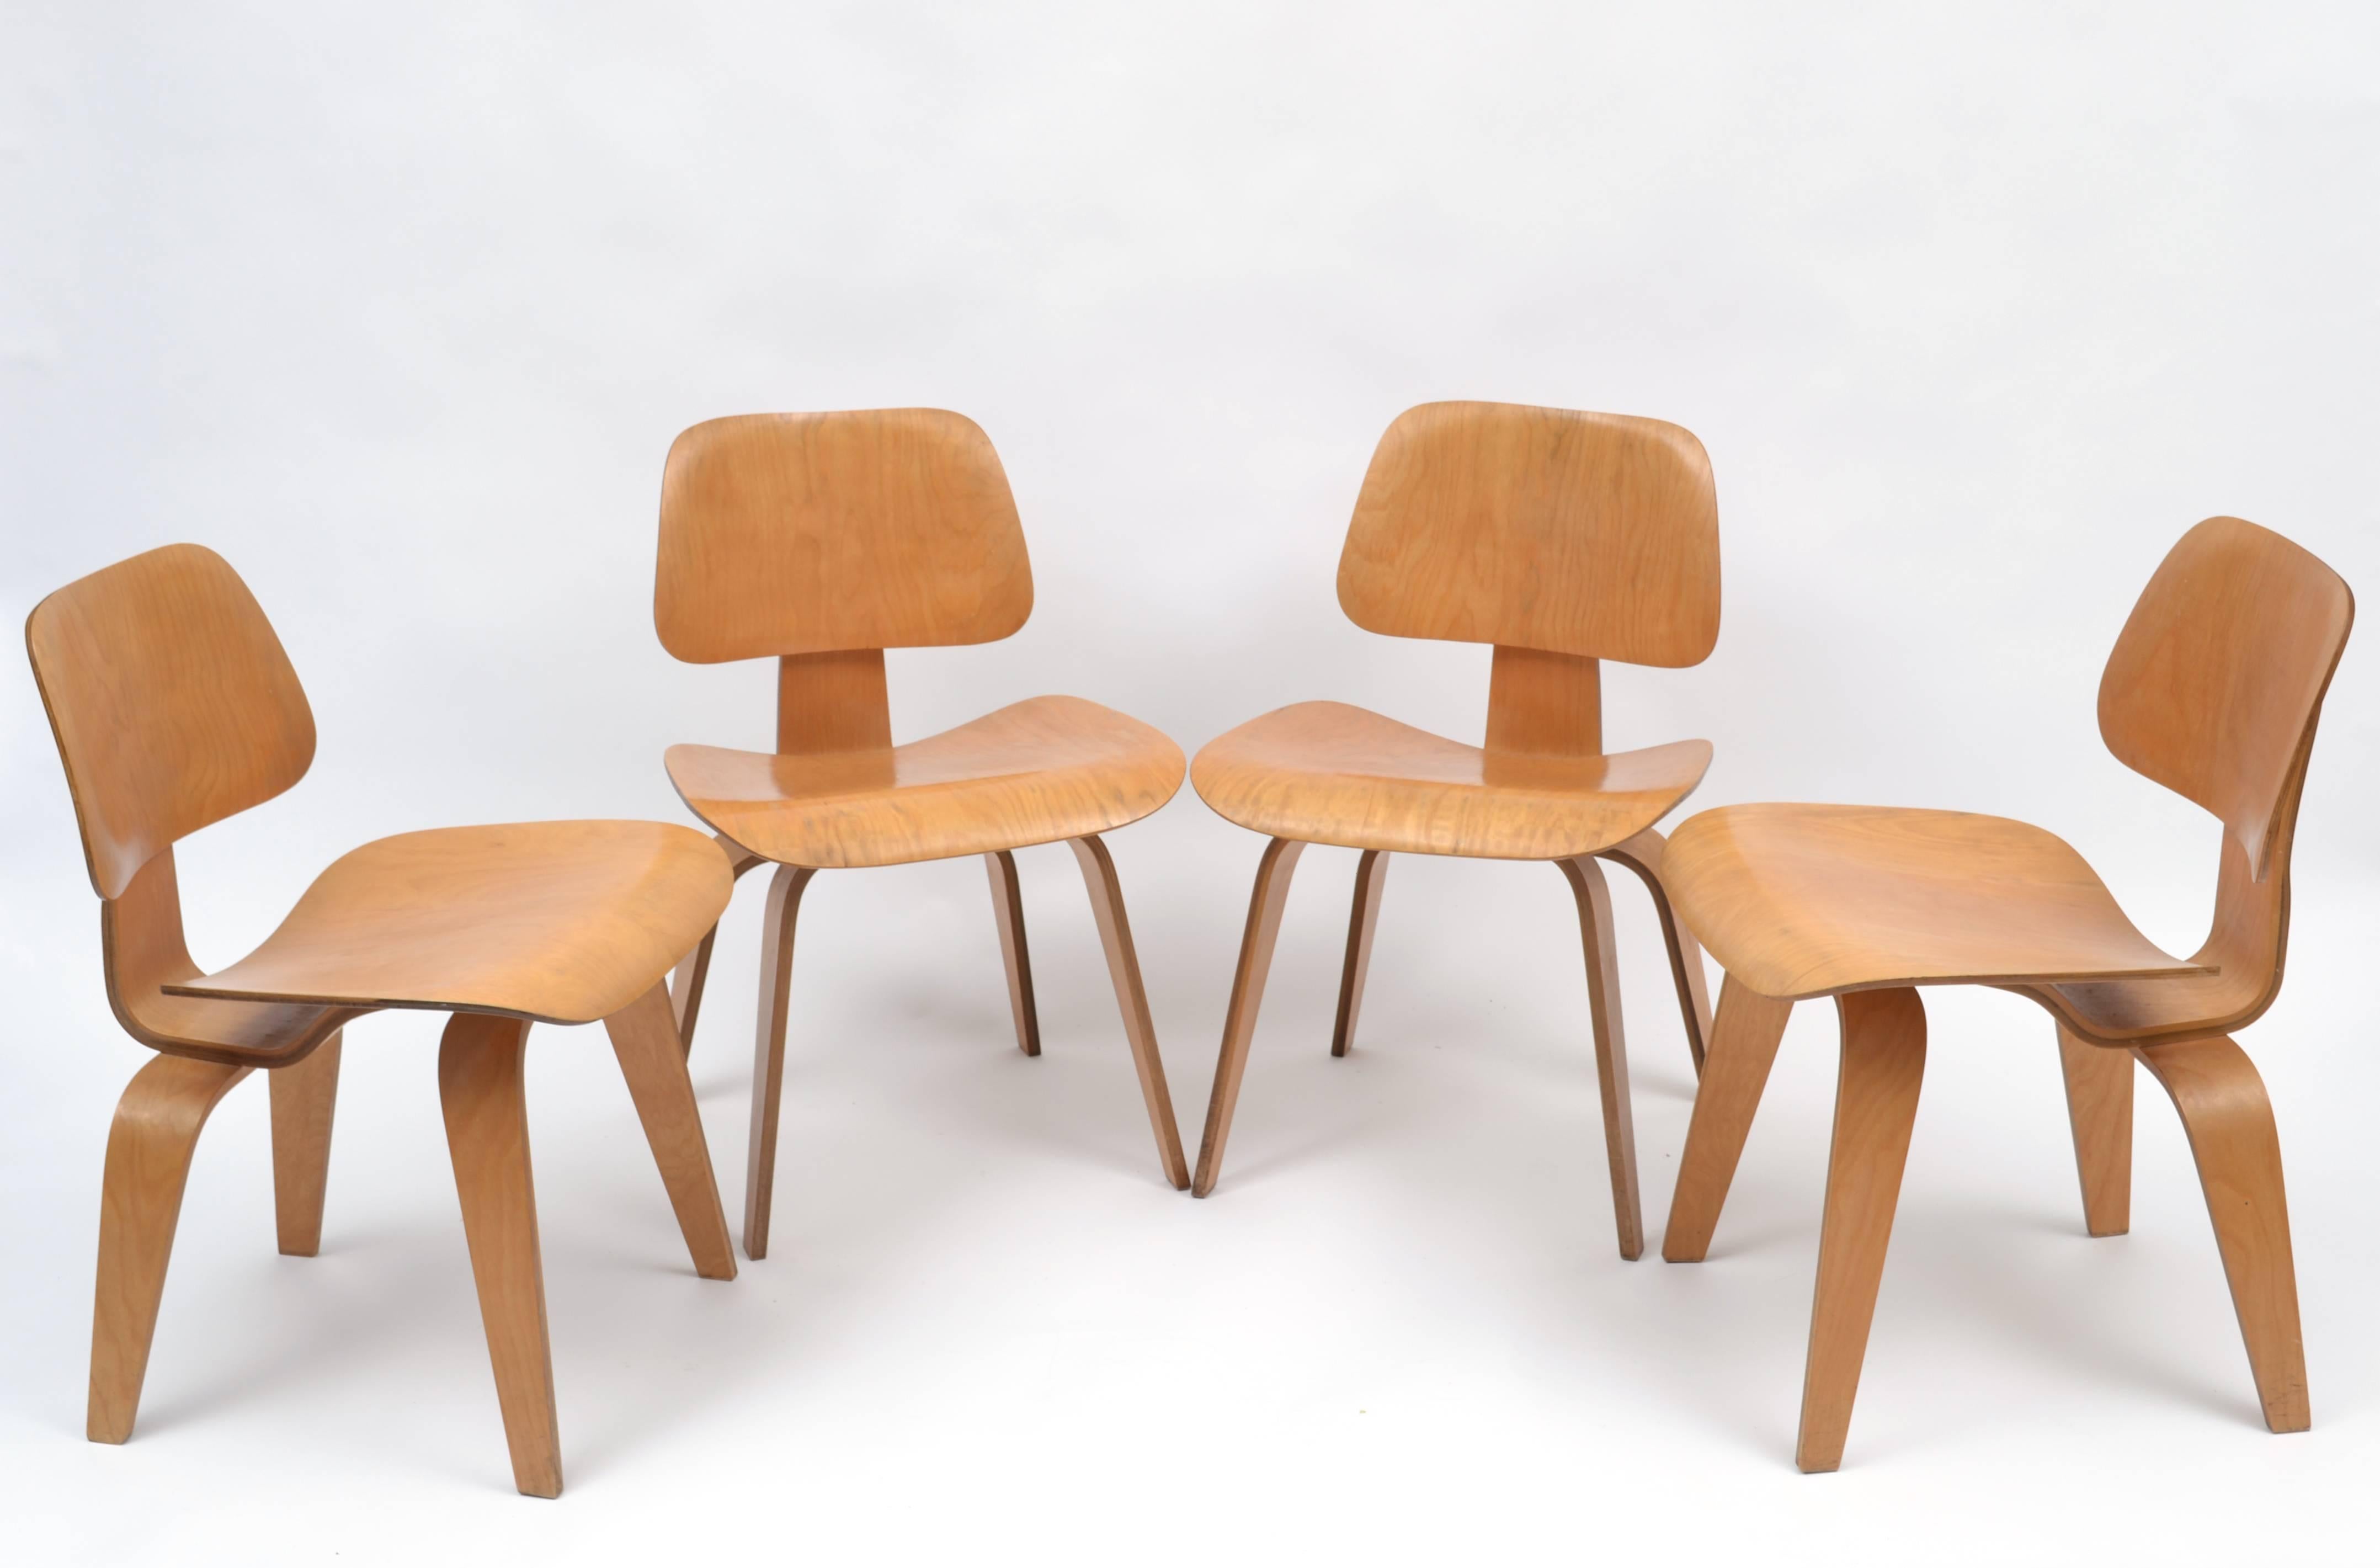 Rare matching Birch Eames DTW-1 (Dining Table Wood) and four DCW's (Dining Chair Wood). The set is all original and in remarkable condition considering it was used daily since it's purchase by the original owner's in the late 1940s. This is a great